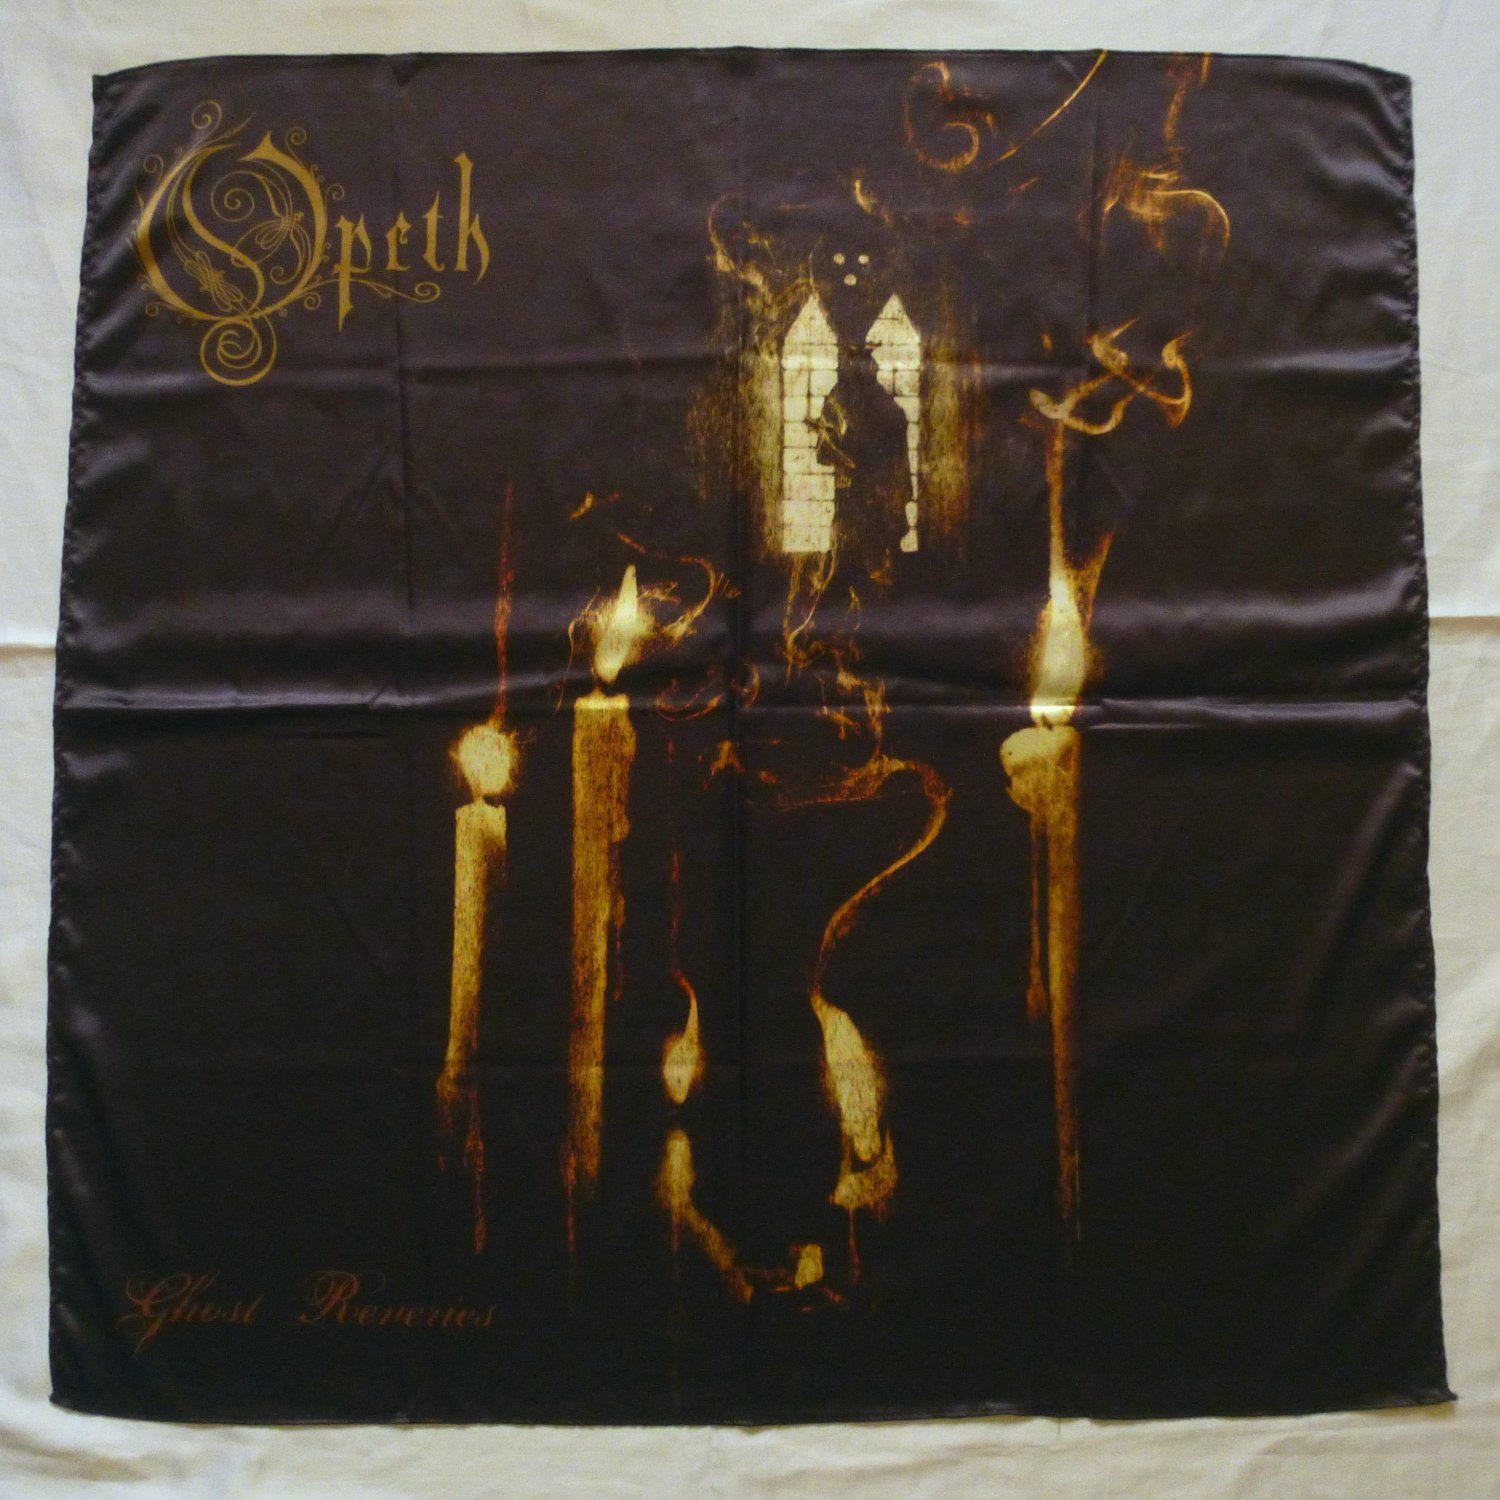 OPETH - Ghost reveries FLAG cloth Poster Banner 3'x3' Heavy Death METAL